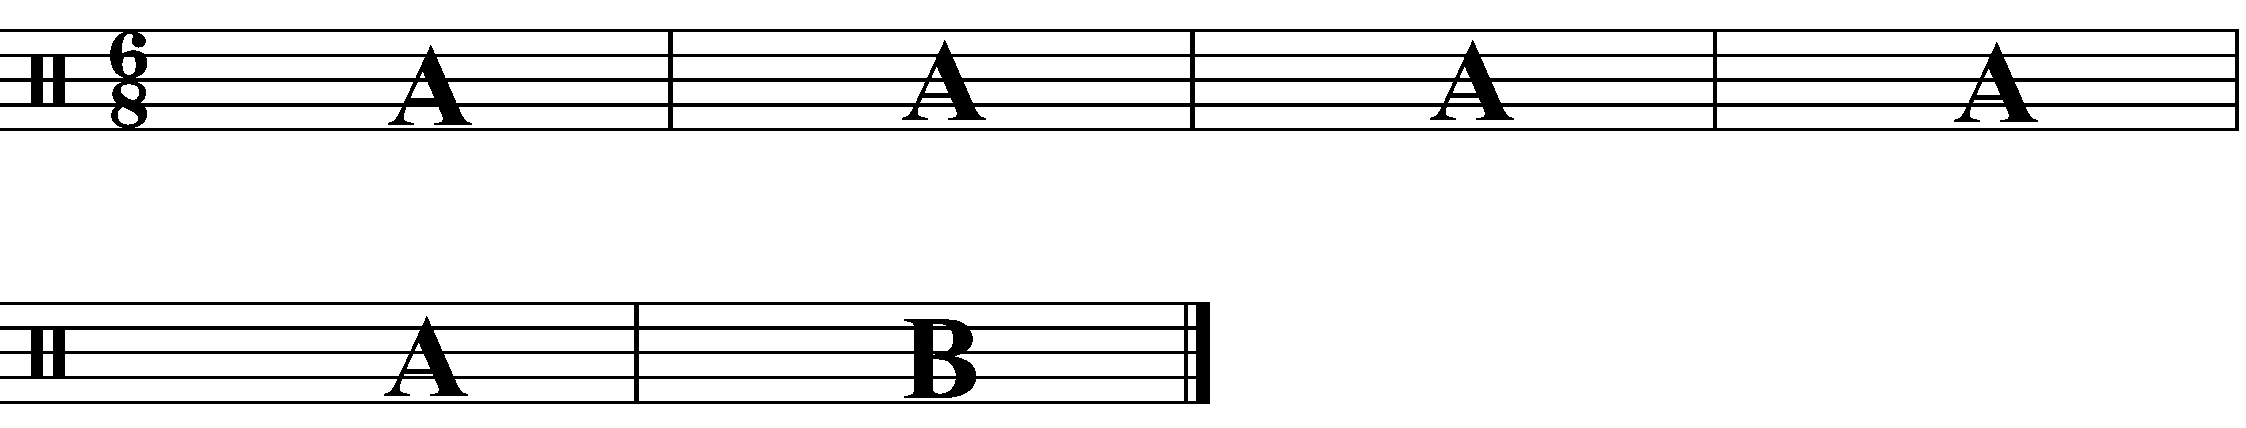 A six bar phrase made up 5 lots of A followed by a B.